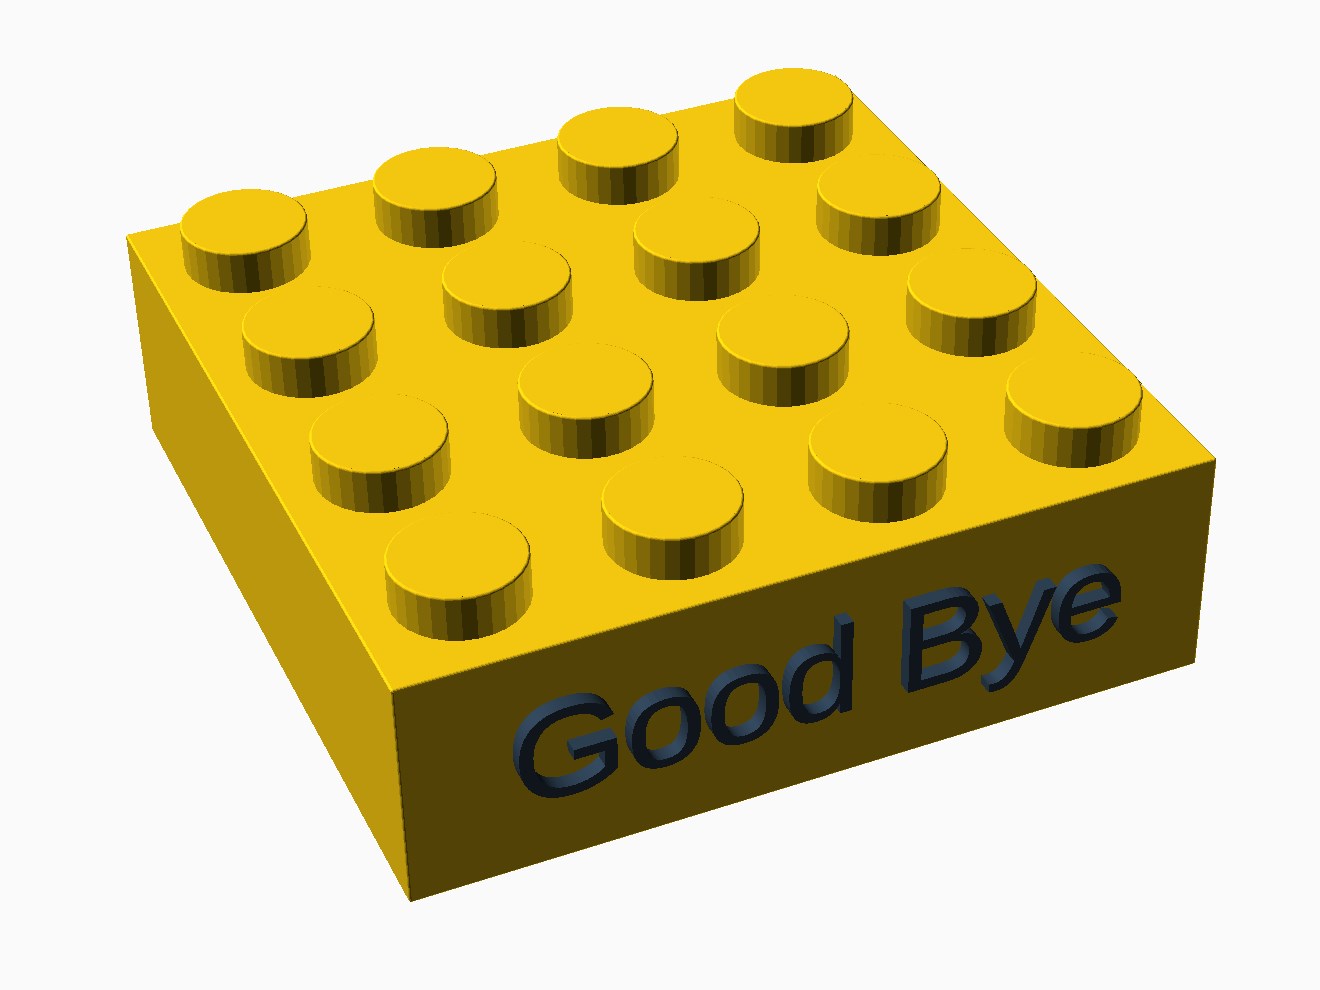 3D printable model of a LEGO 4x4 brick with protruding text.